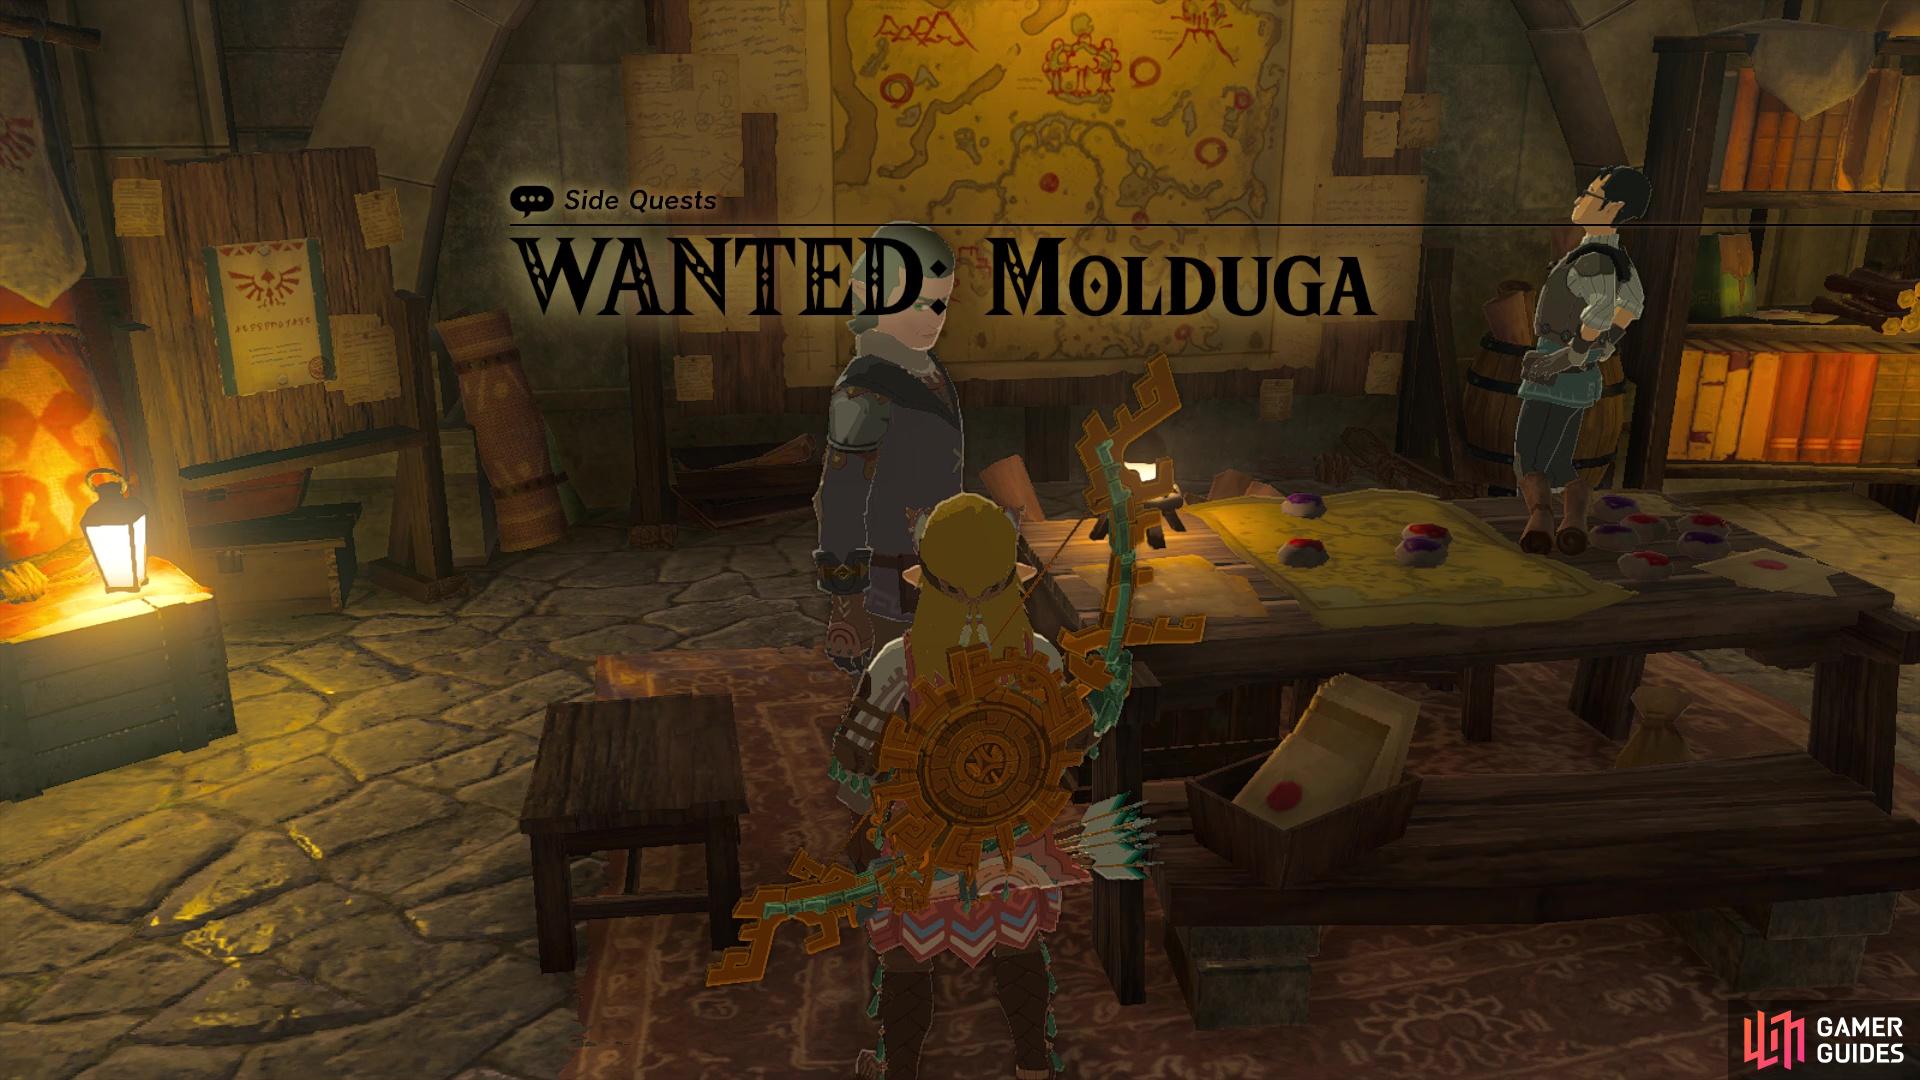 You will be hunting a Molduga, in the desert, for this quest.